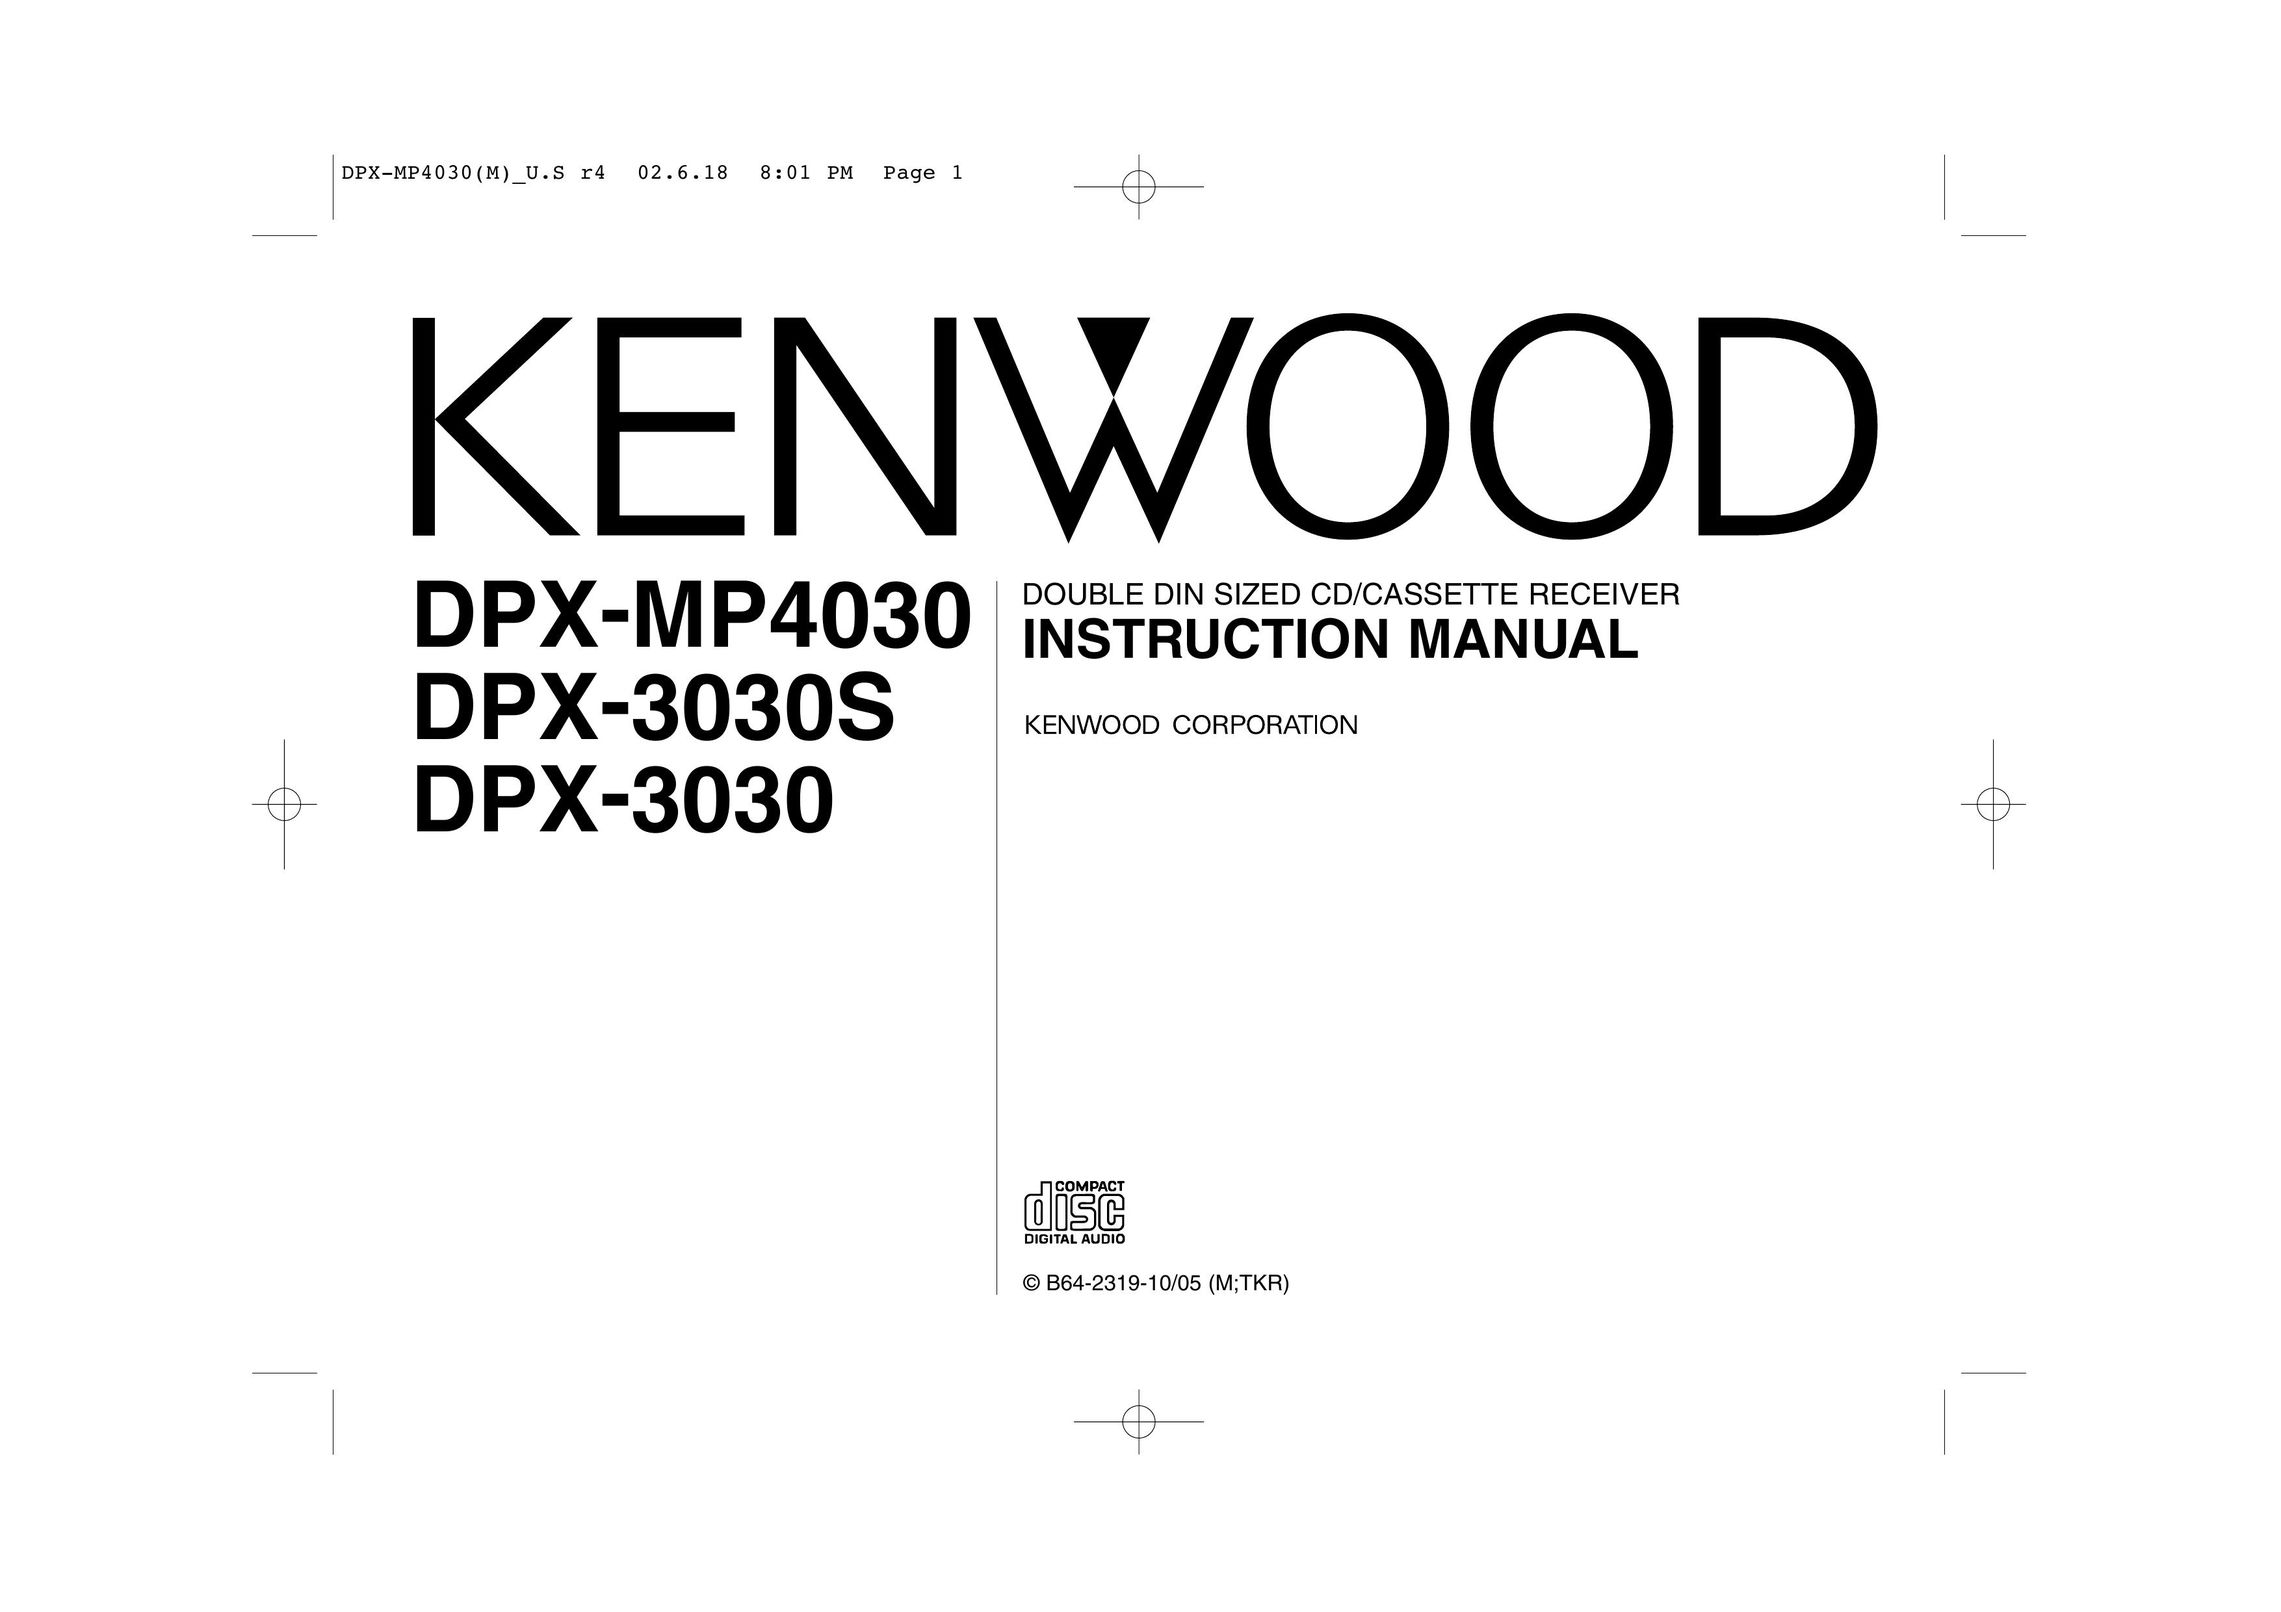 Kenwood DPX-MP4030 Car Stereo System User Manual